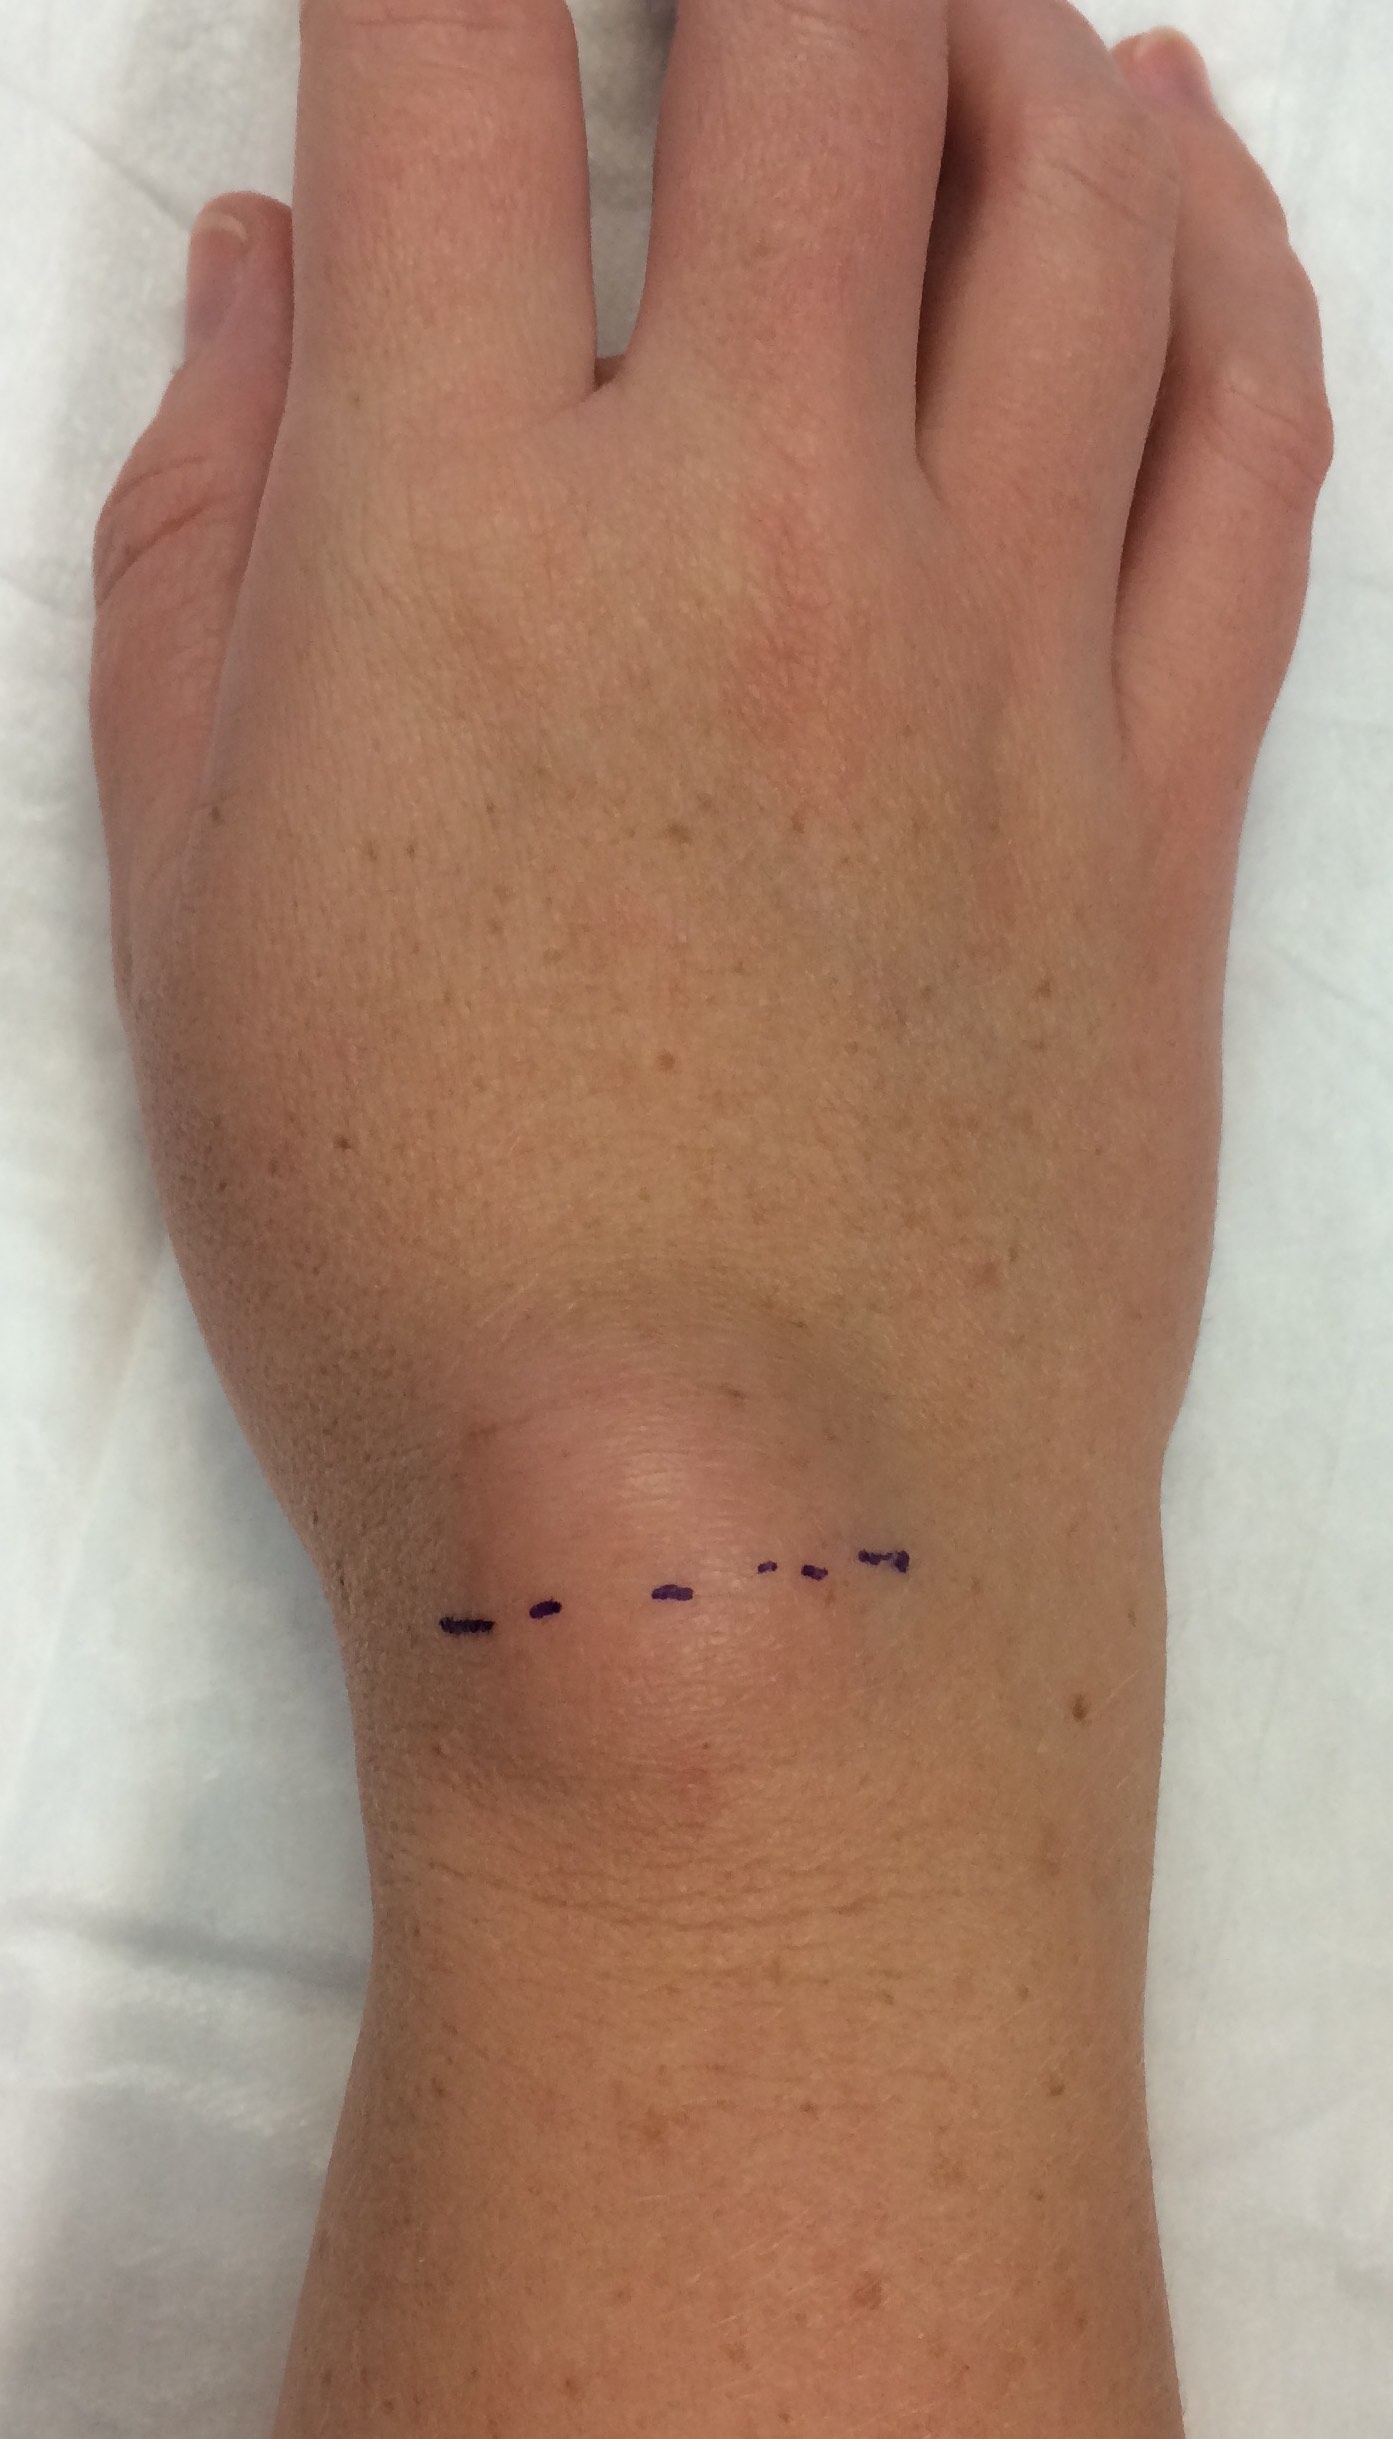 A wrist ganglion with surgery incision marked